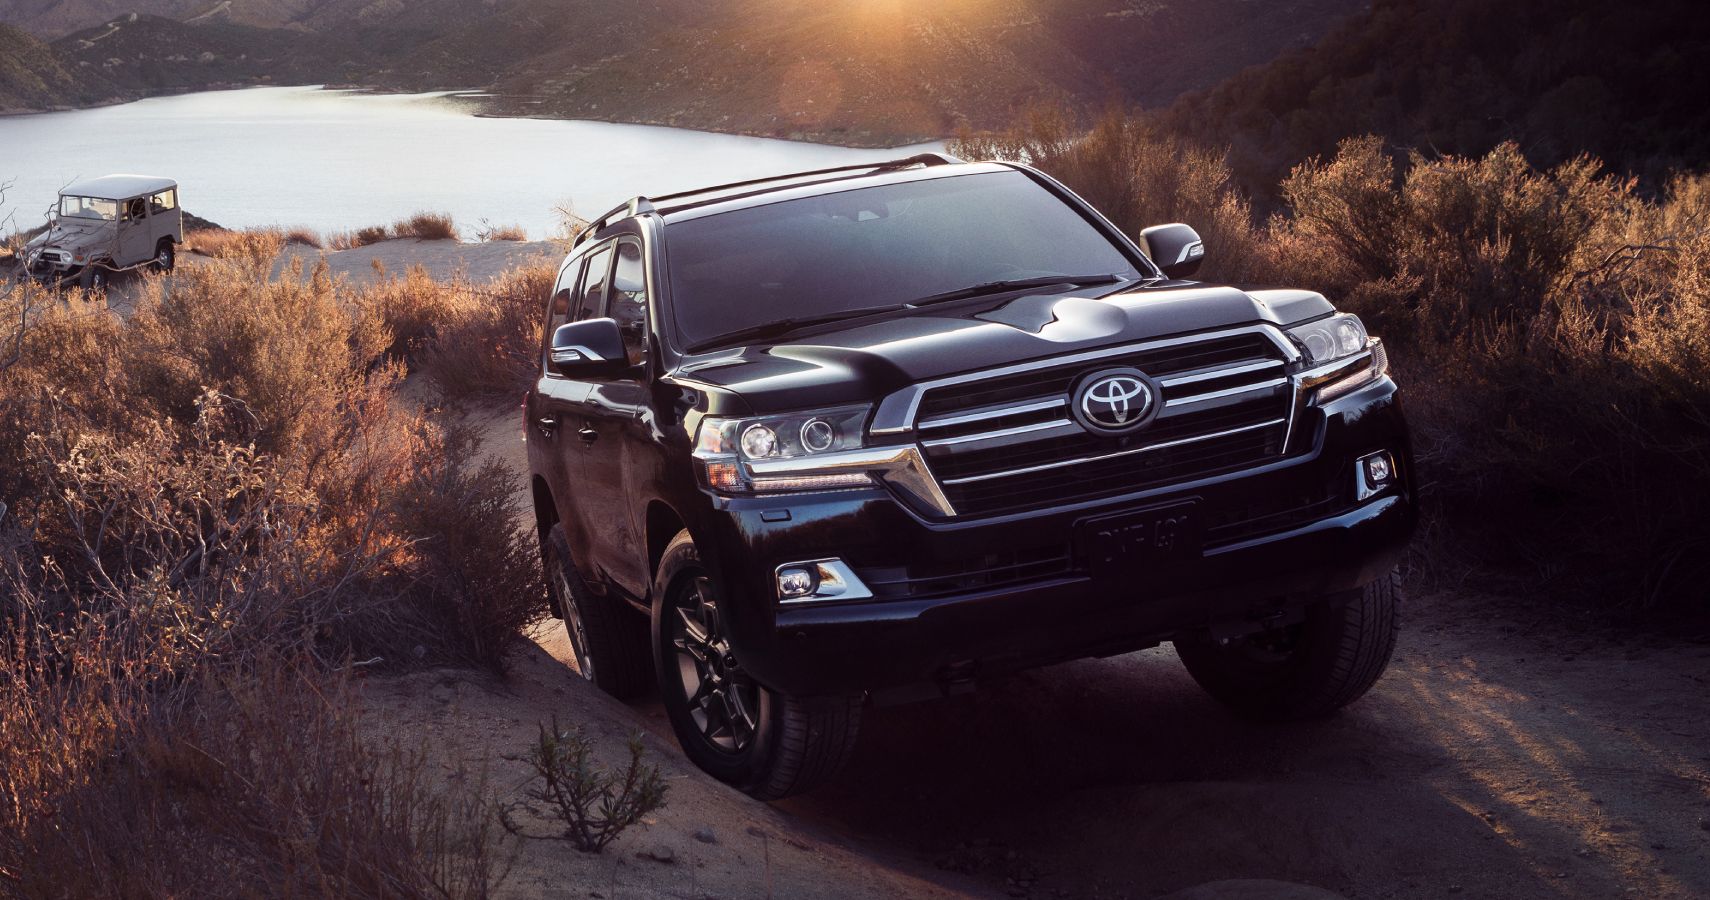 2020 Toyota Land Cruiser Heritage Edition parked outdoors